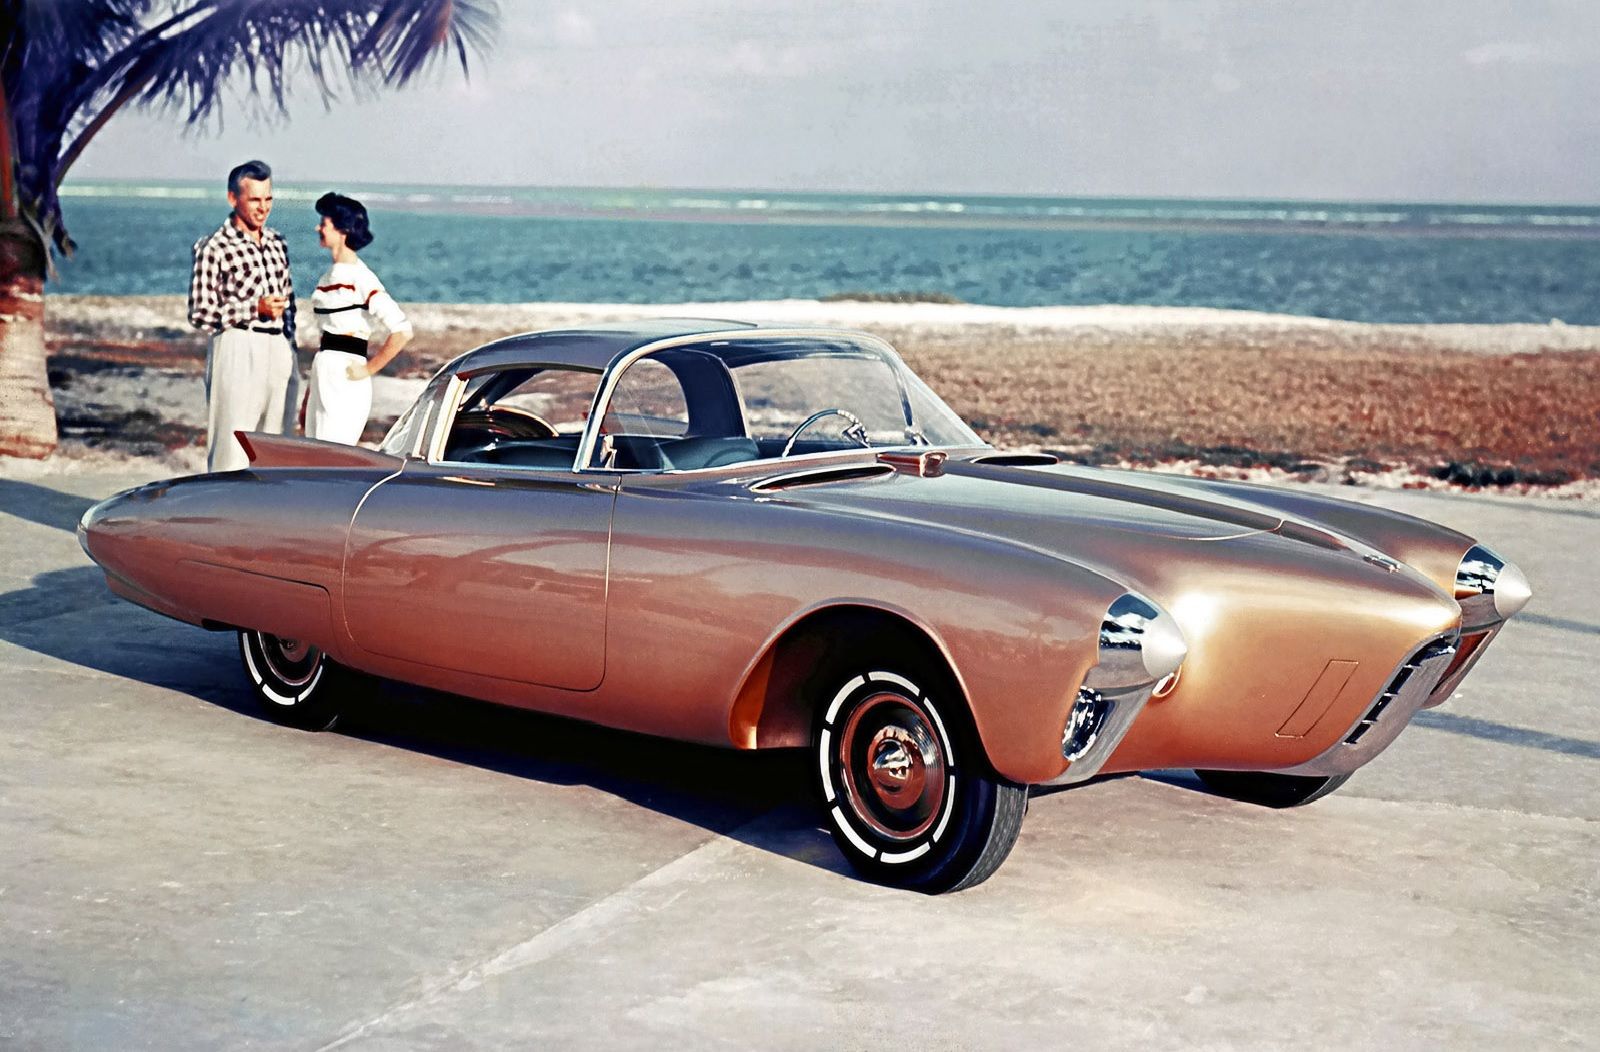 30 Incredibly Bonkers And Beautiful Cars From The 1950s To Now photo 3